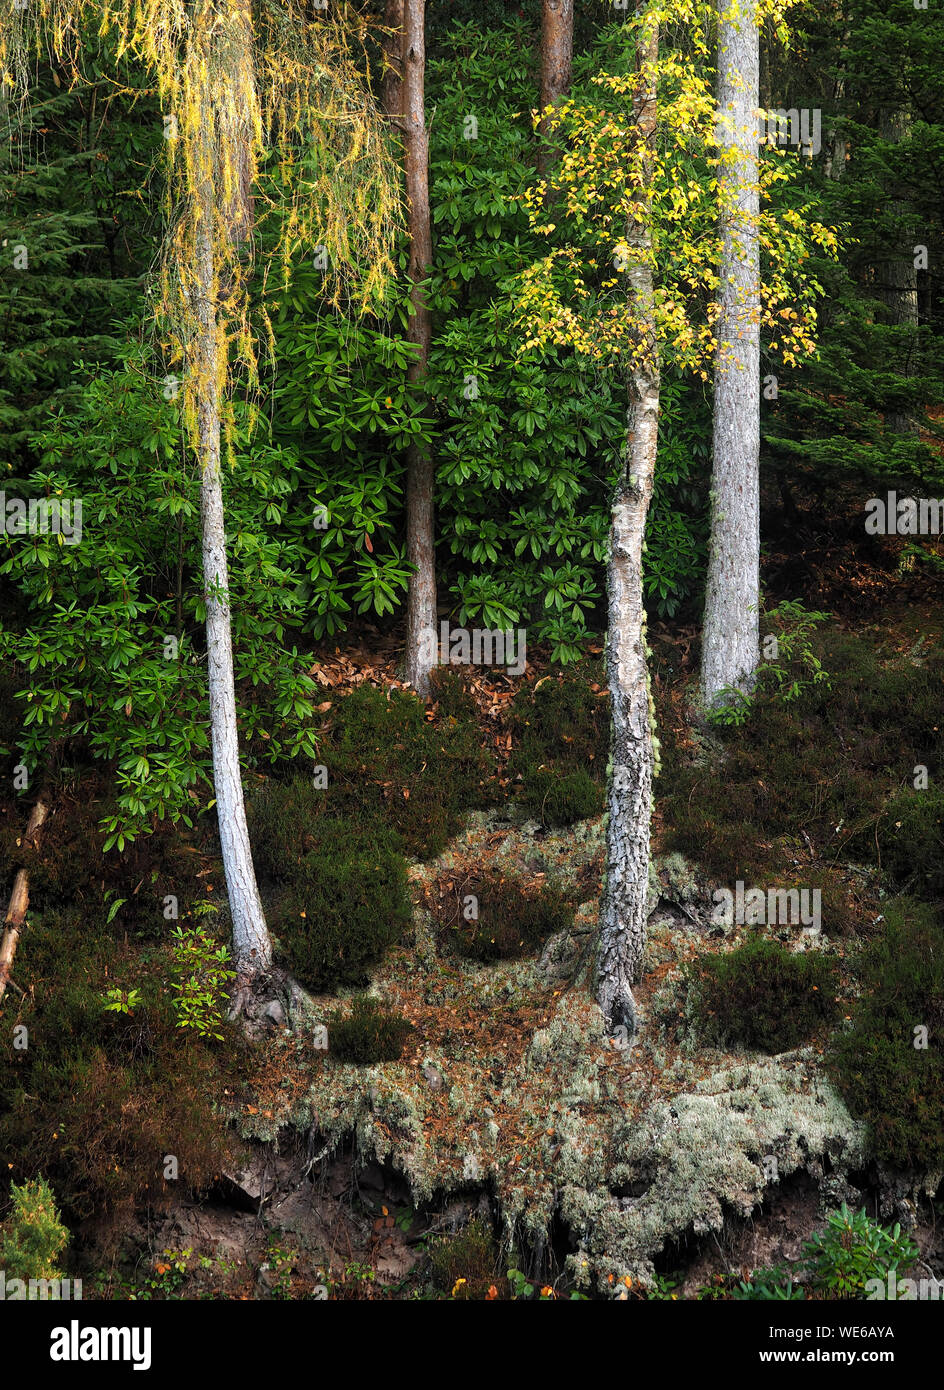 Birch tree growing on edge of eroded bank with rhododendron and conifer trees in background in Glengarra Woods, Cahir, Tipperary, Ireland Stock Photo